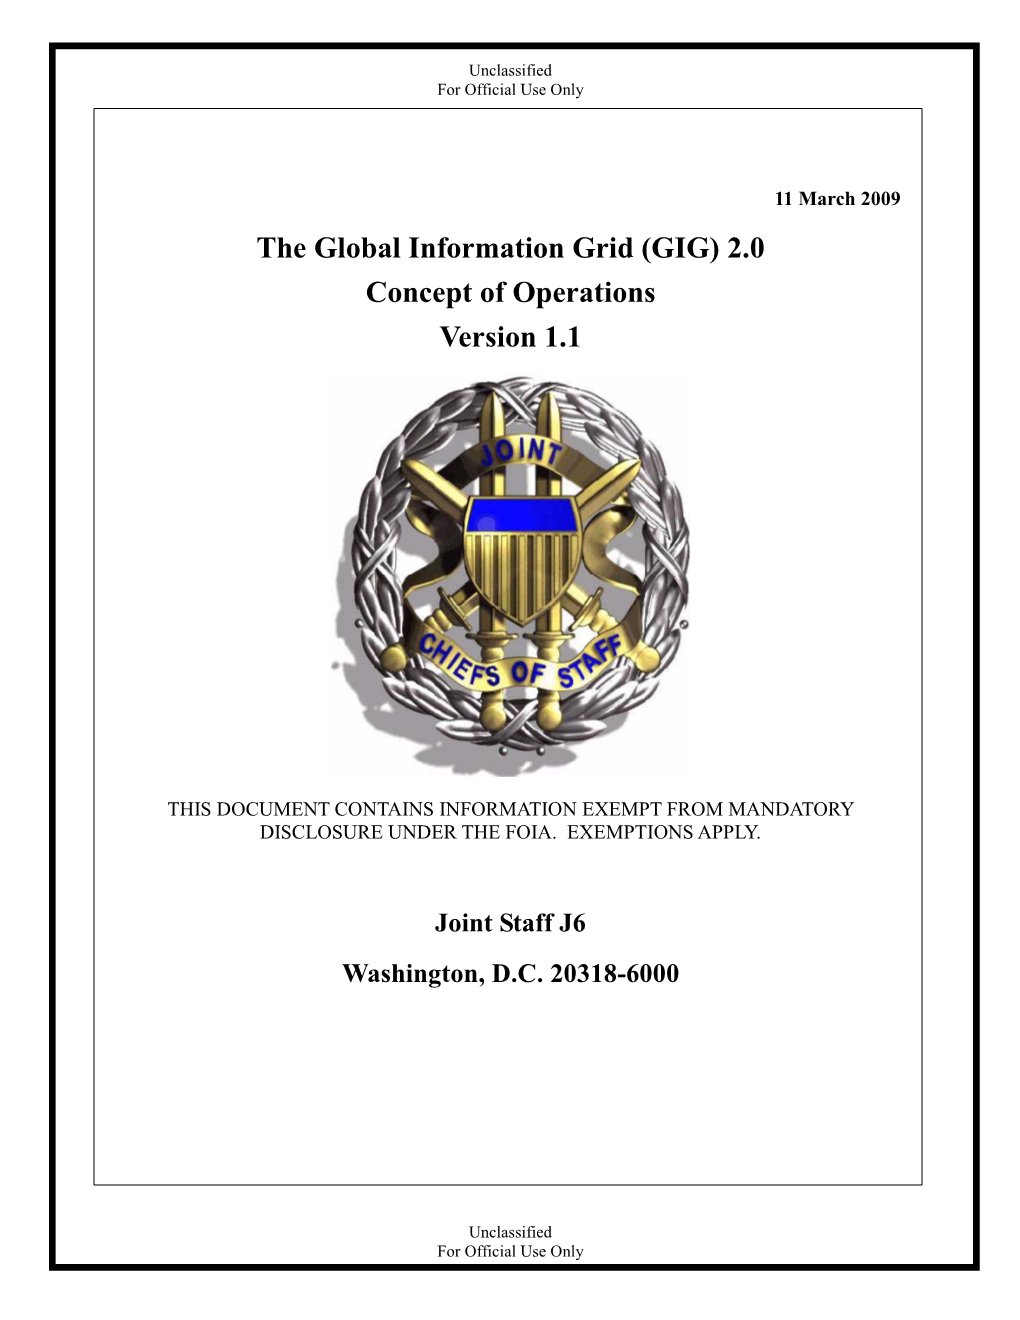 The Global Information Grid (GIG) 2.0 Concept of Operations Version 1.1